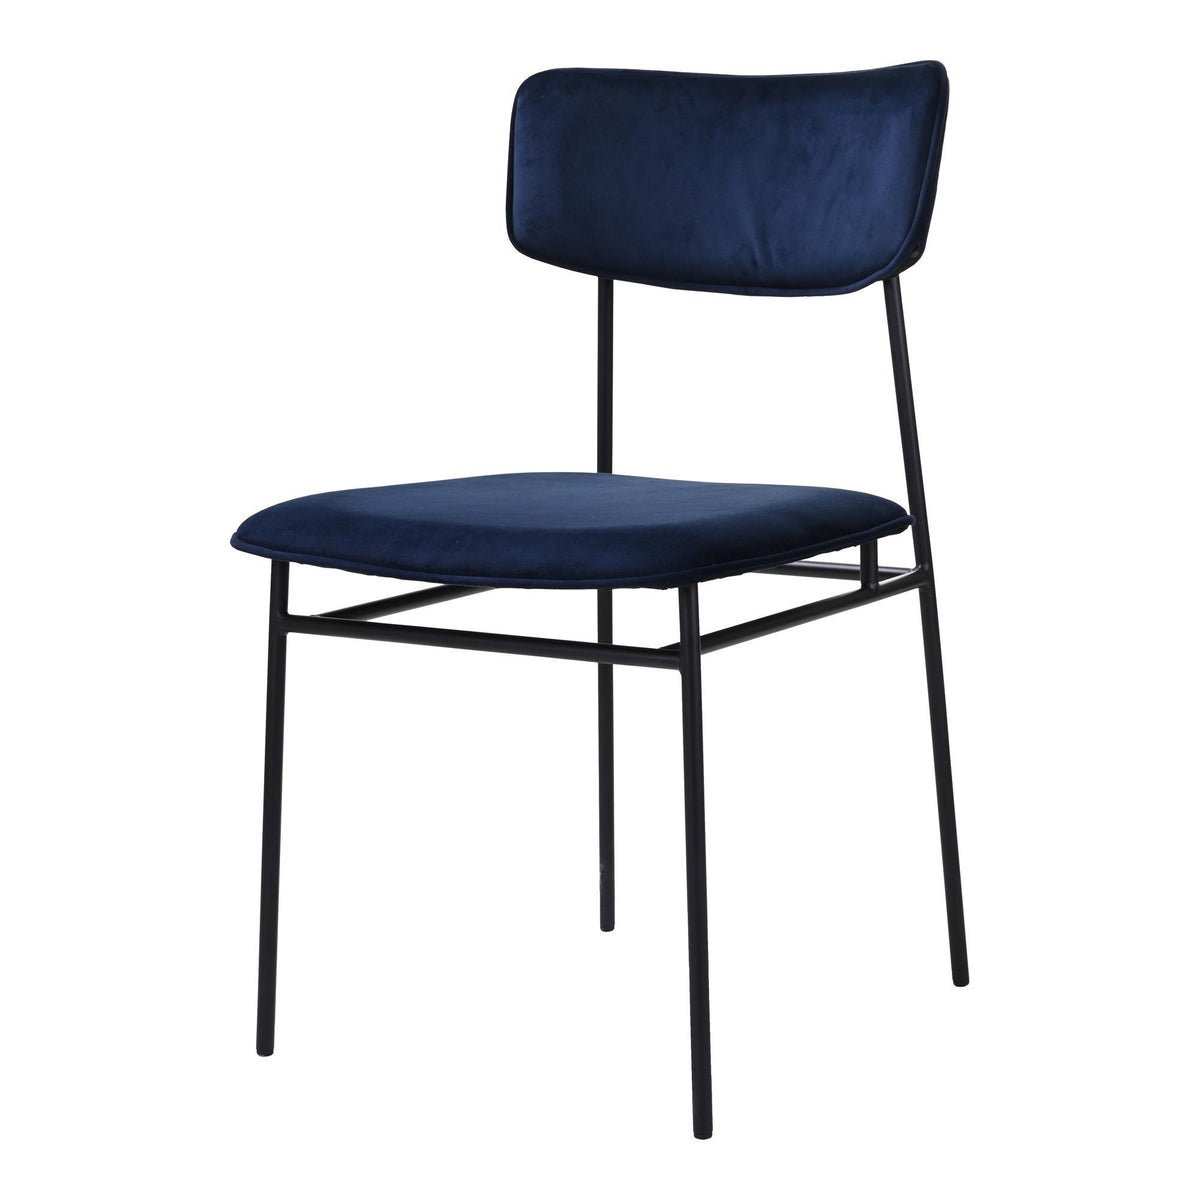 Moe's Home Collection Sailor Dining Chair Blue - EQ-1016-26